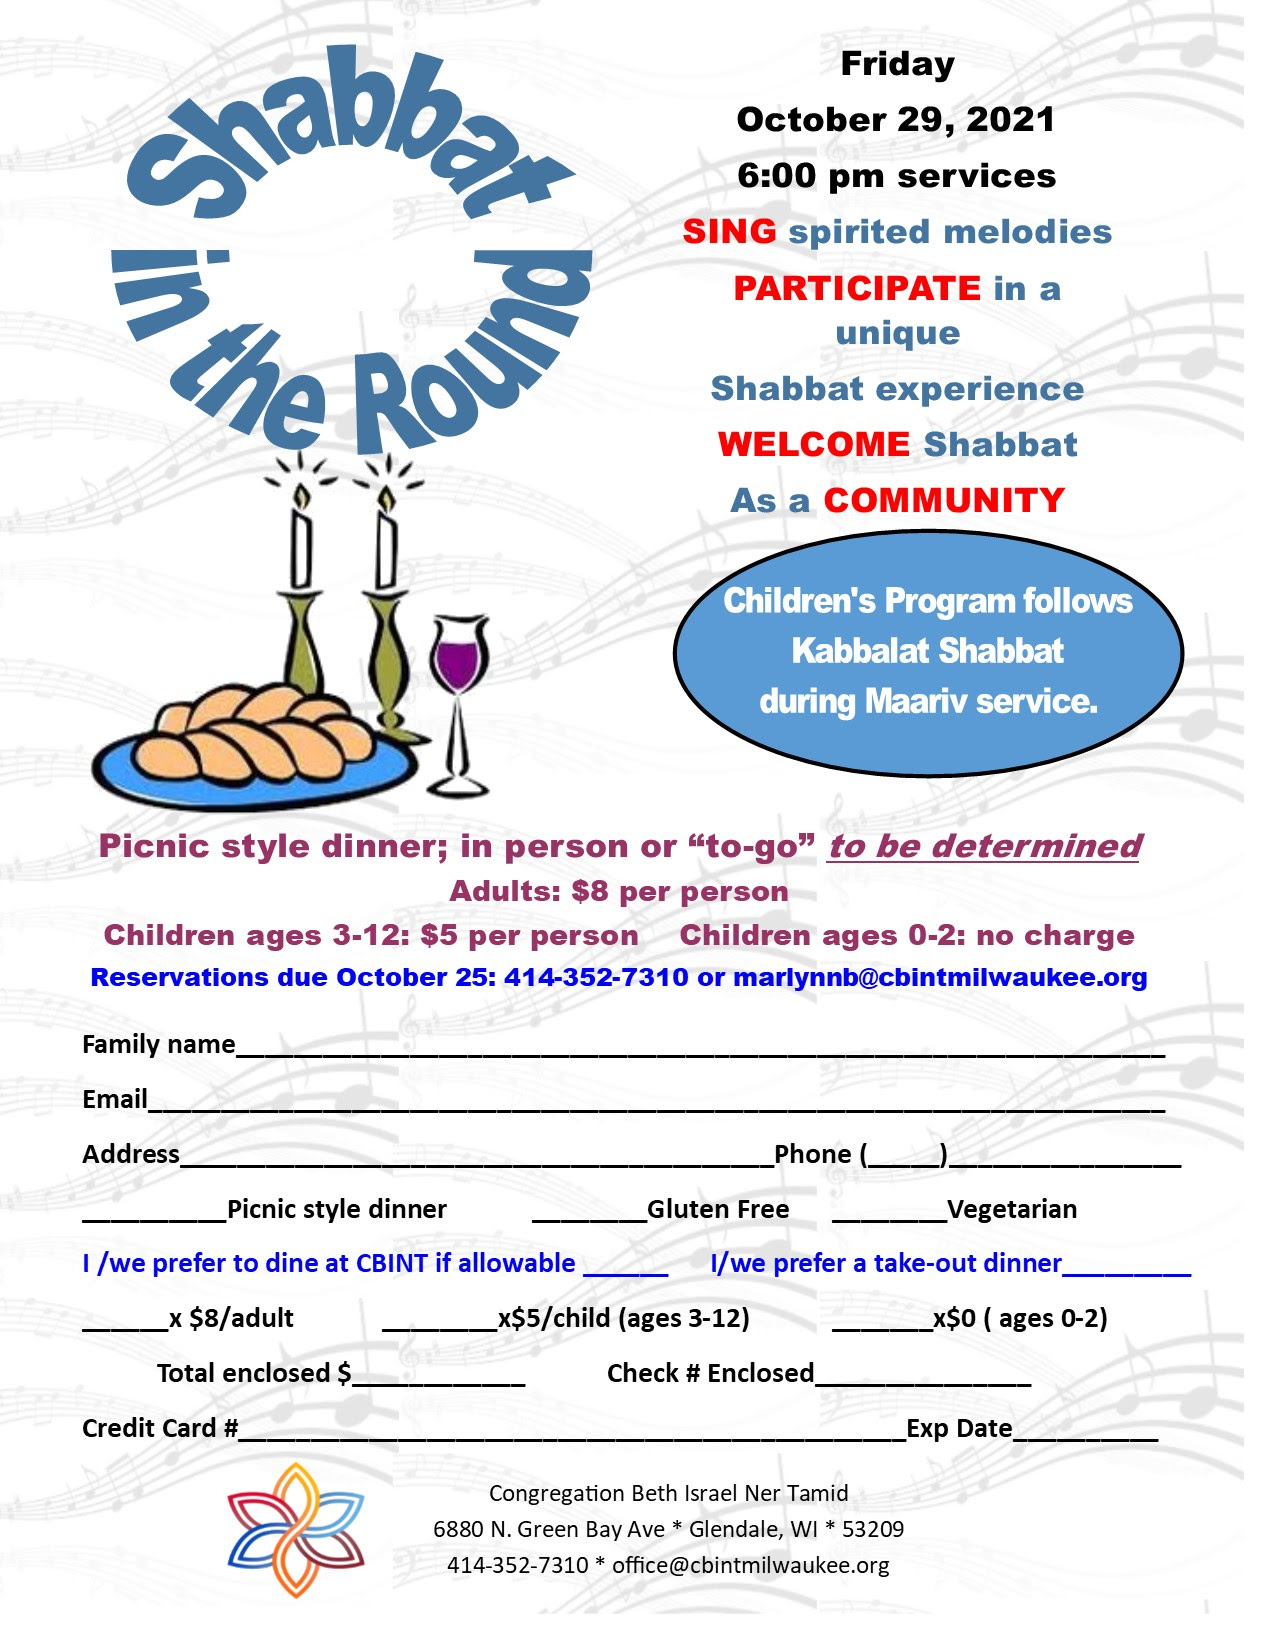 Shabbat in the Round. Friday, October 29, 2021. 6:00 pm services. SING spirited melodies. PARTICIPATE in a unique Shabbat experience. WELCOME Shabbat as a COMMUNITY. Children's Program follows Kabbalat Shabat during Maariv service. Picnic style dinner; in person or "to-go" to be determined. Adults: $8 per person. Children ages 3-12: $5 per person. Children ages 0-2: no charge. Reservations are due October 25: 414-352-7310 or marlynnb@cbintmilwaukee.org. 